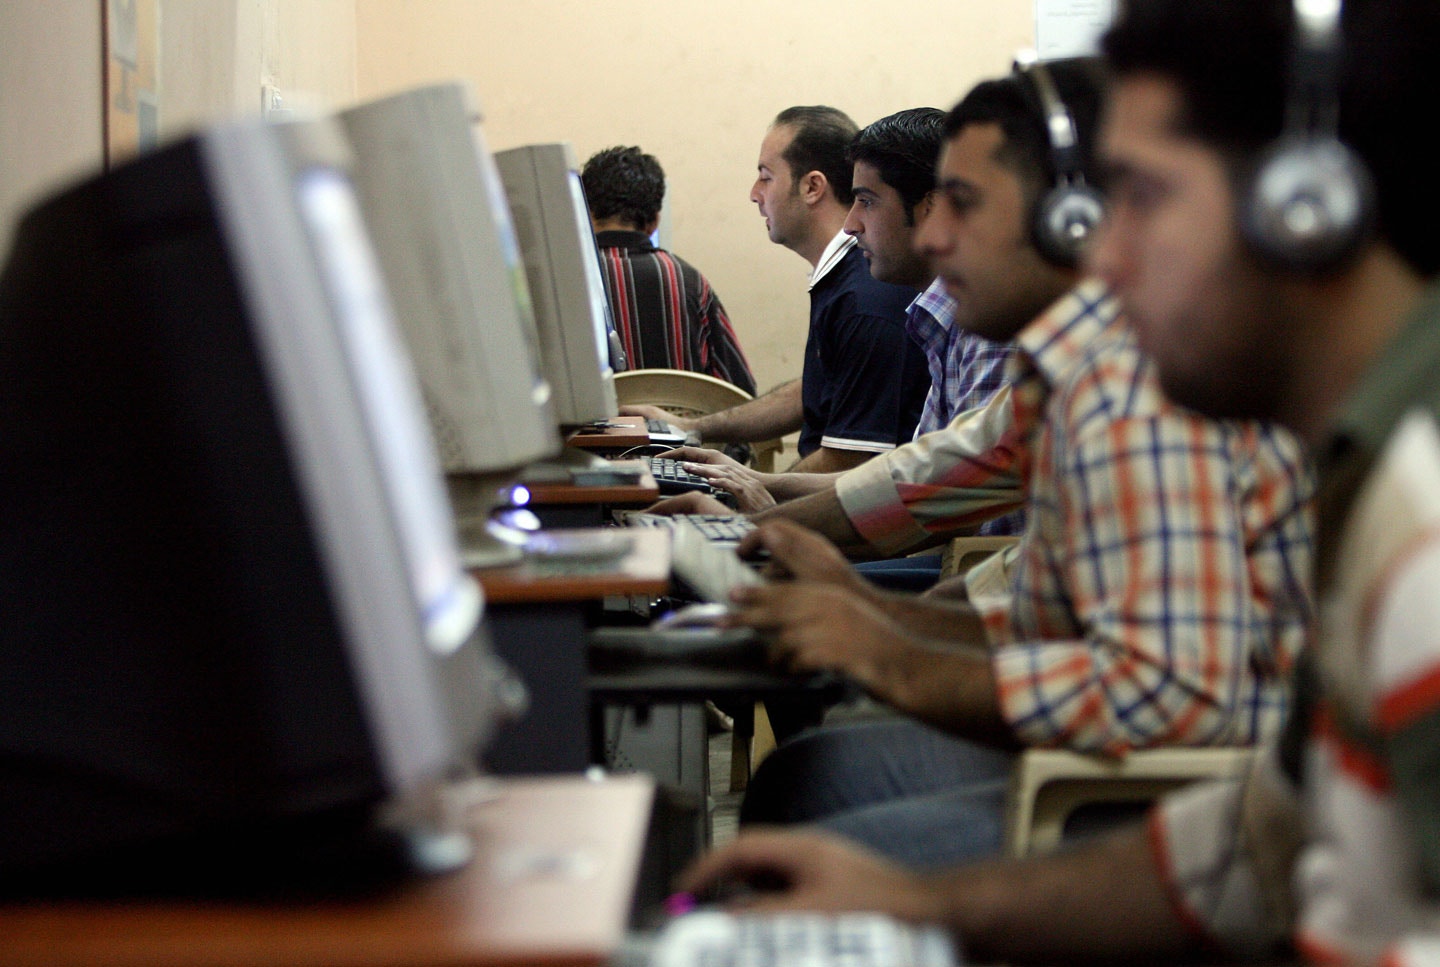 Iraqi youth surf the web at an internet cafe in Baghdad's impoverished district of Sadr city, 15 November 2007. Iraqi youth are spending more time on the internet; following local and international news or chatting with far away friends as they try to escape their bitter reality by staying in connection with the outside world through the virtual world of the internet. AFP PHOTO/ALI AL-SAADI (Photo credit should read ALI AL-SAADI/AFP/Getty Images)